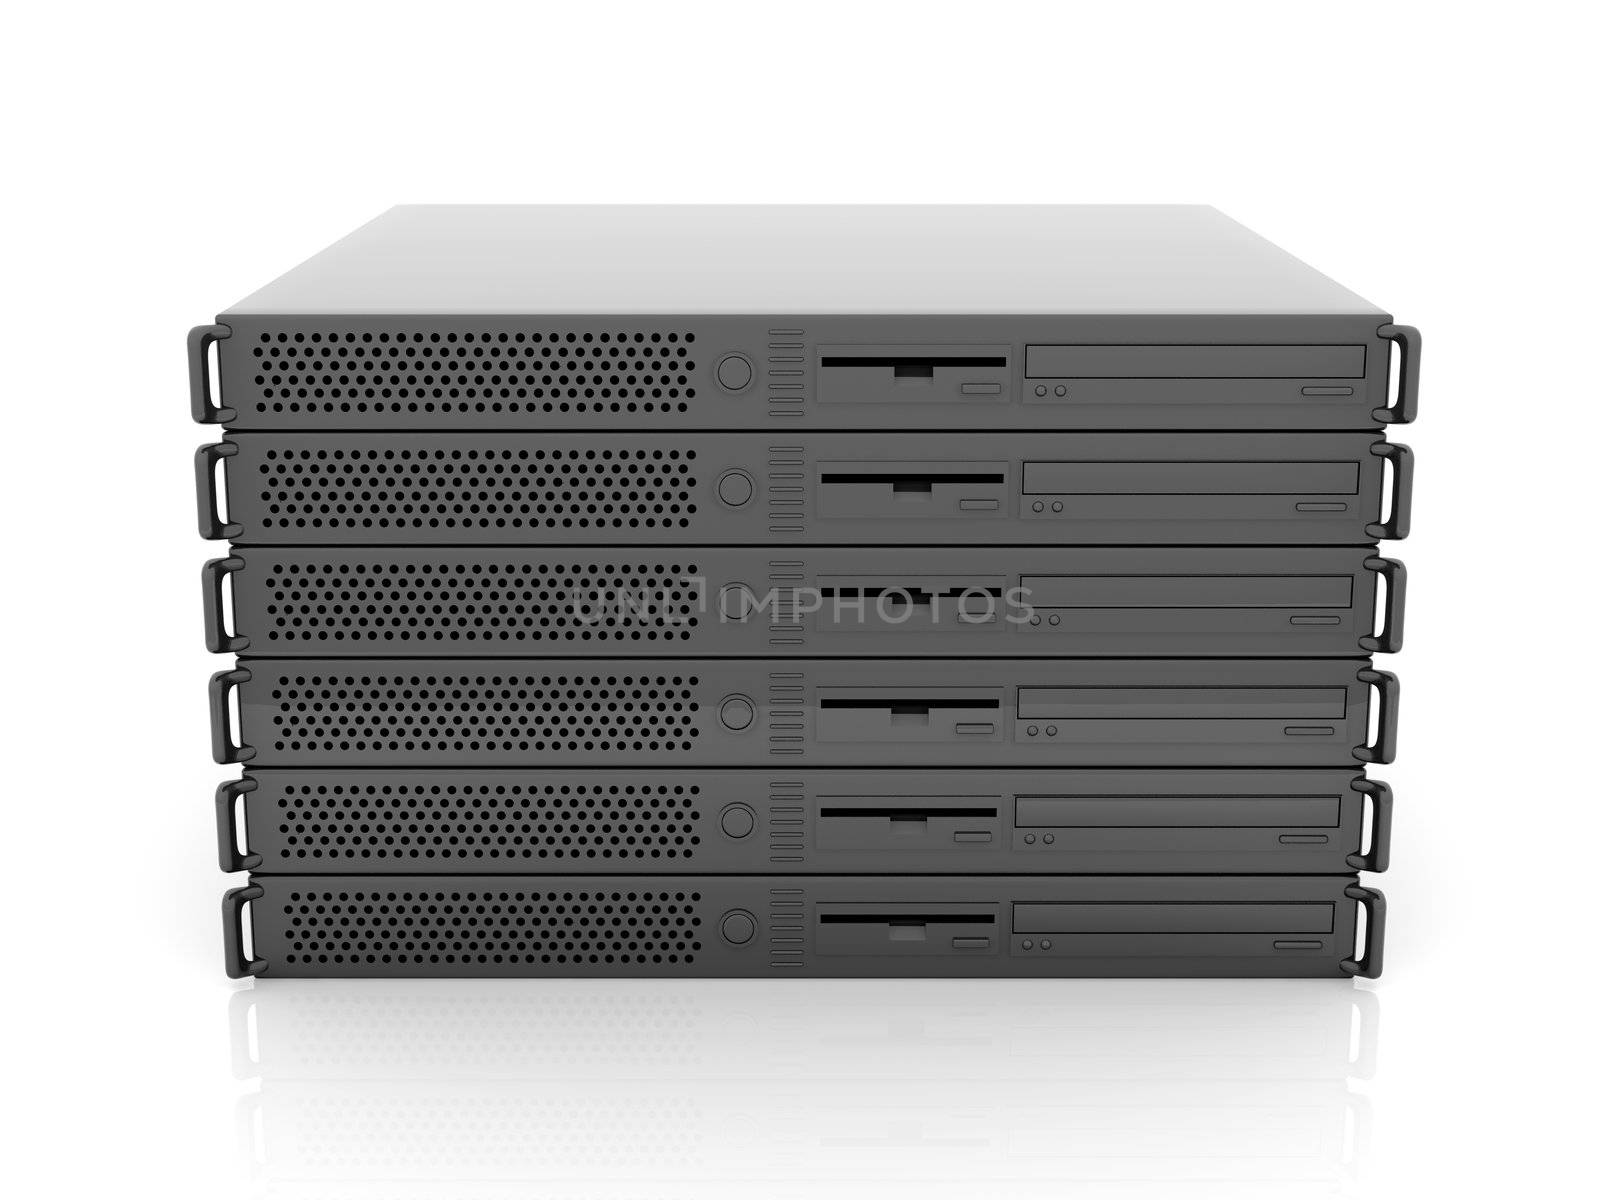 19inch Server Stack 19inch Server Stack by Spectral